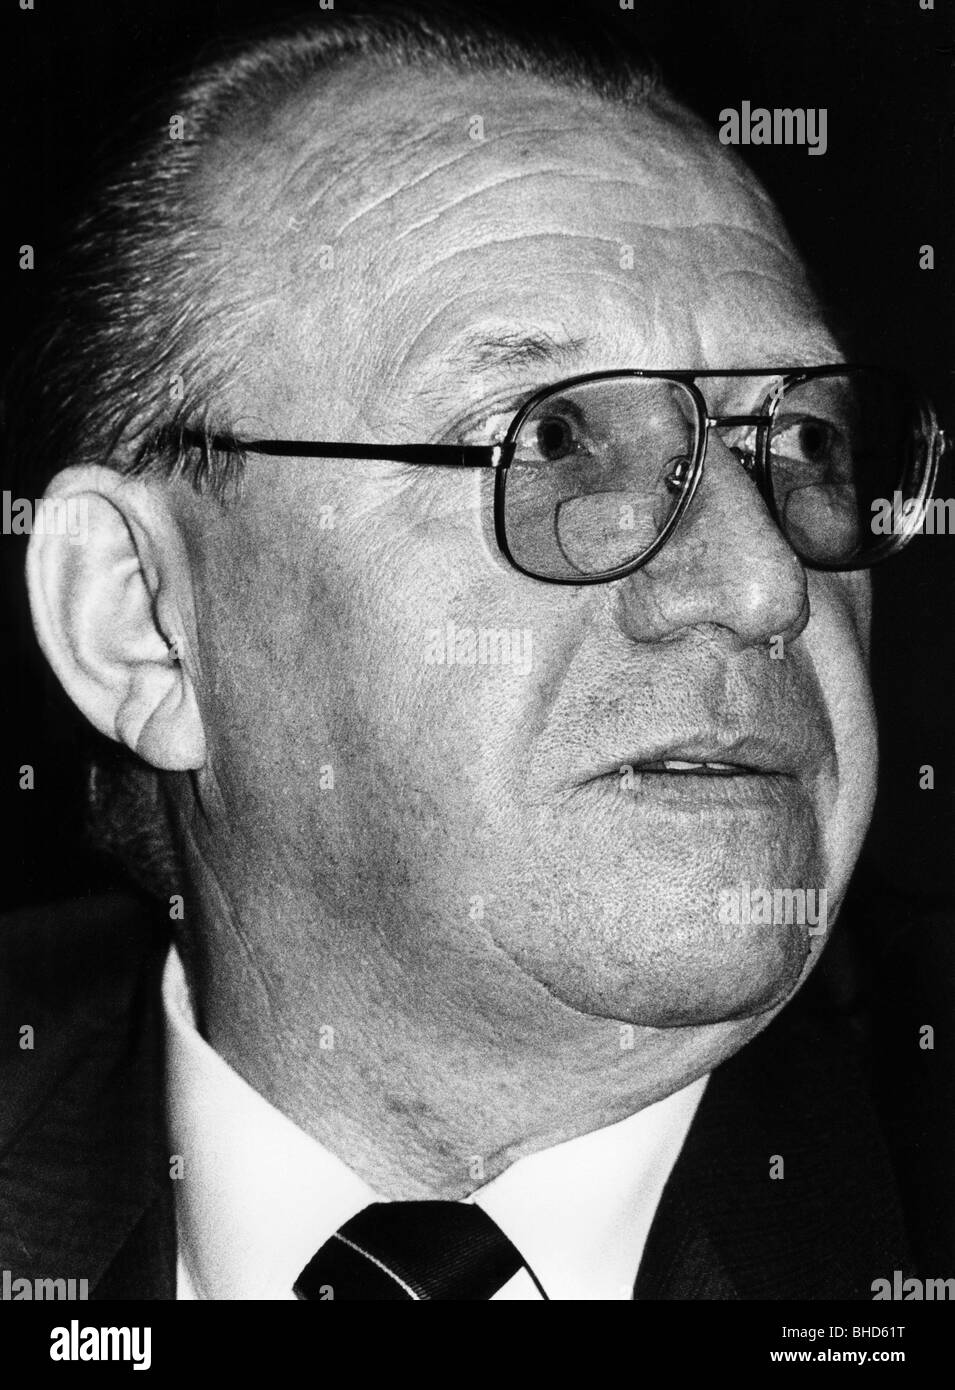 Carl, Conrad, trade union chairman, portrait, taken at an SPD election rally, local elections in Hesse, 5.3.1985, Frankfurt on the Main, Stock Photo